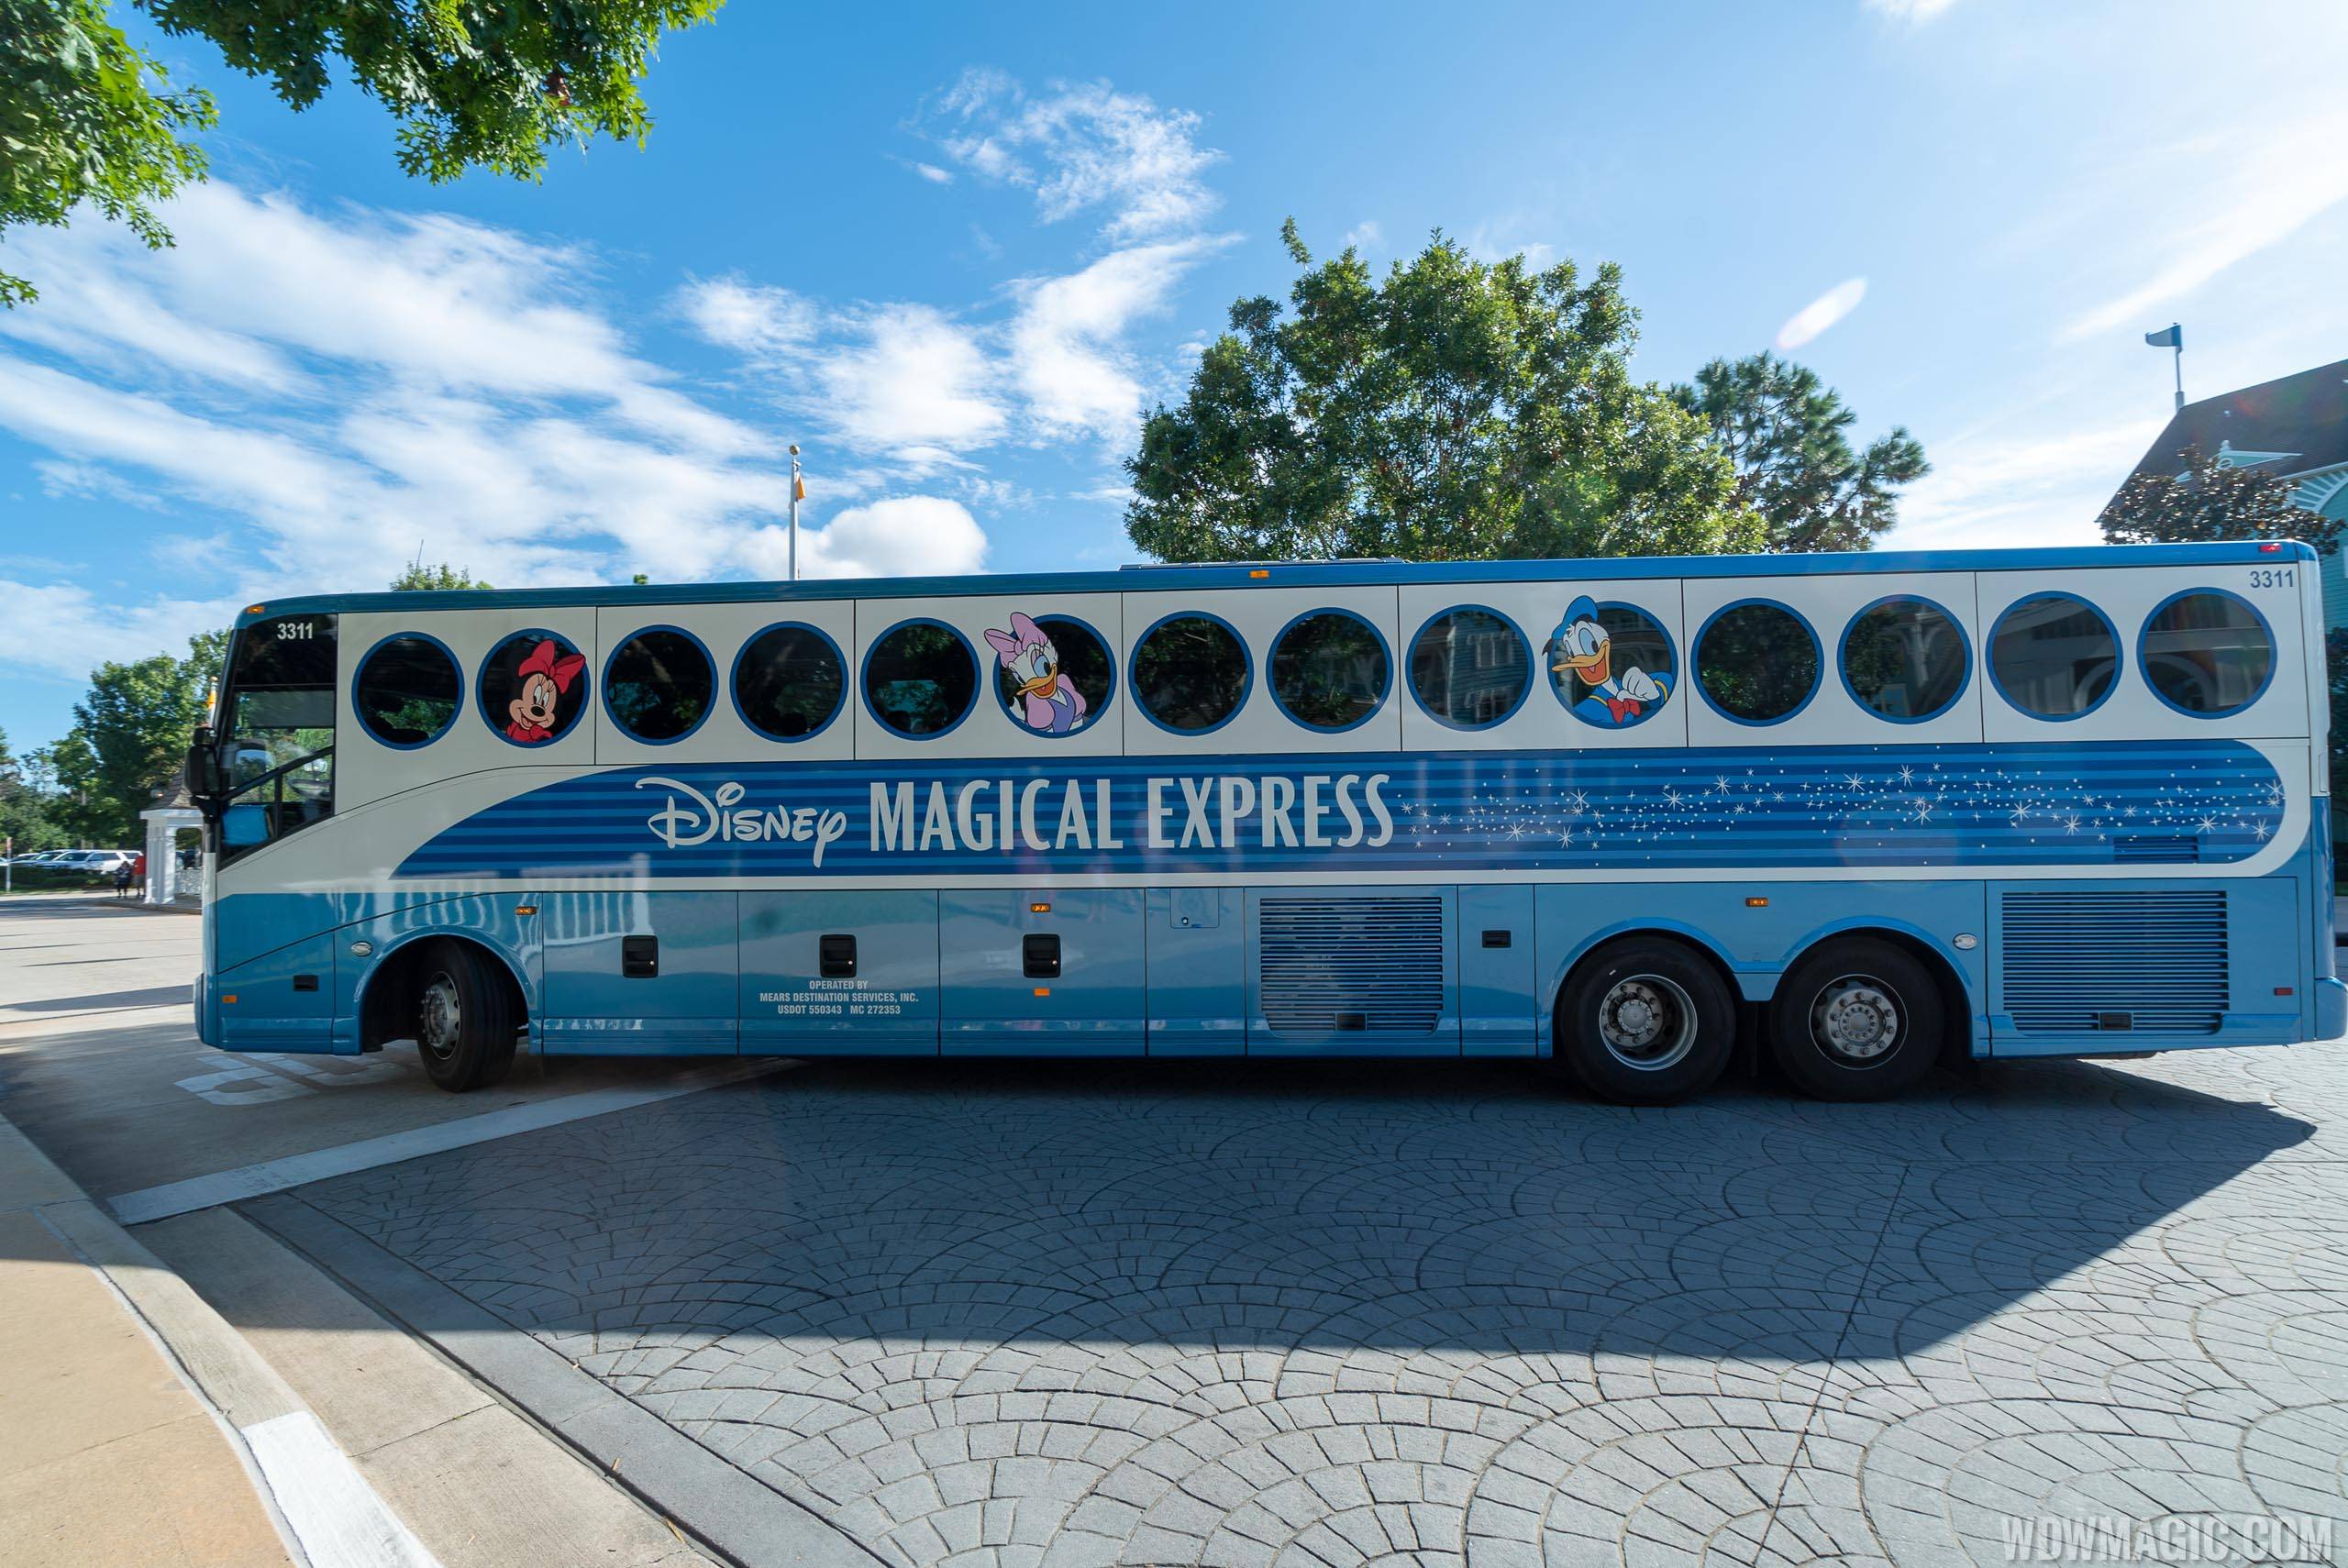 Disney's Magical Express has been transporting guests for more than 15 years